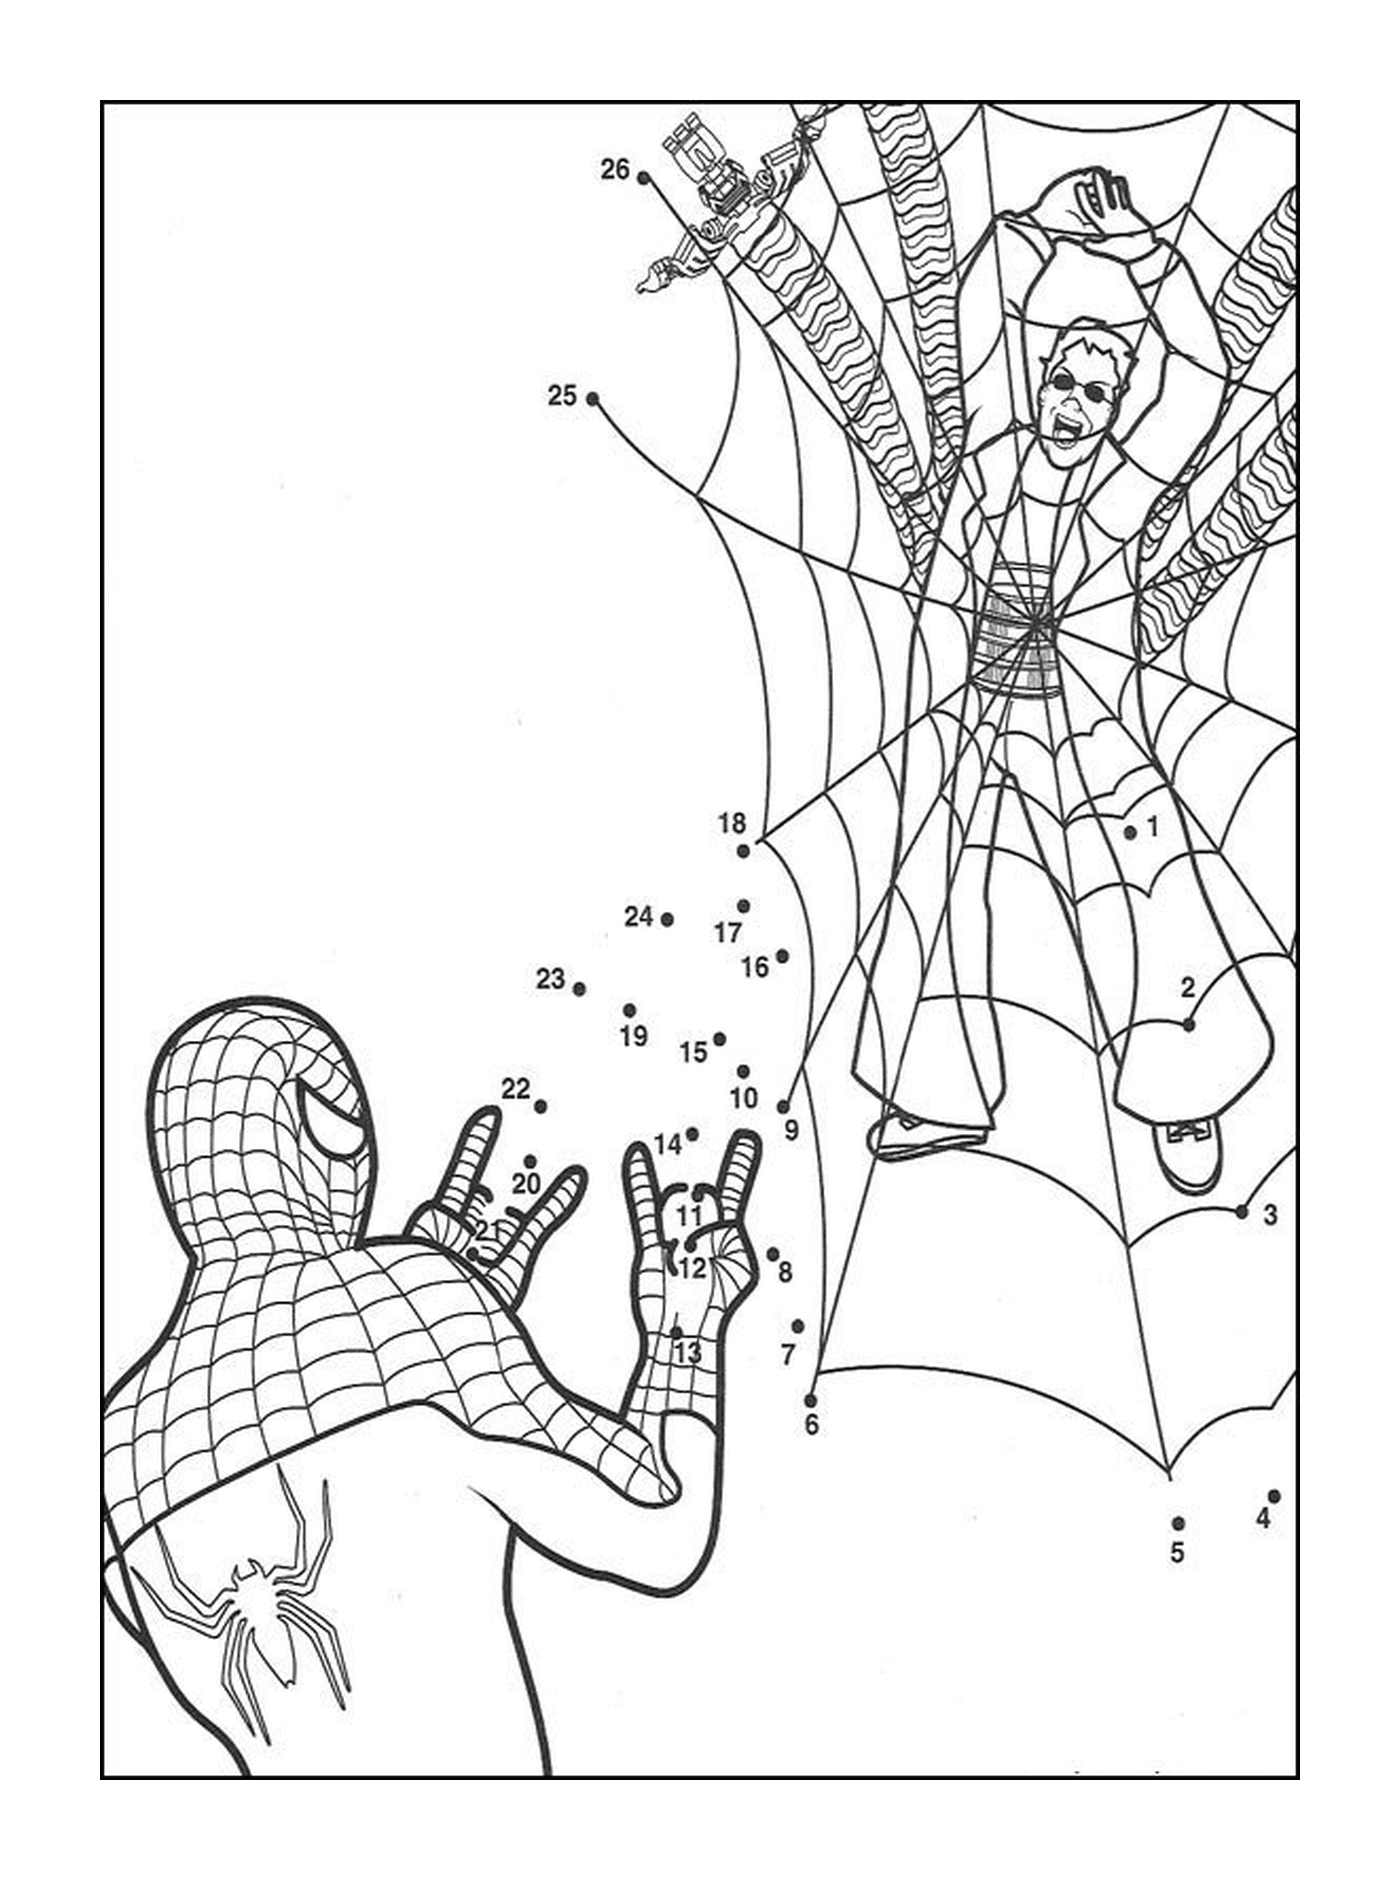  Spider-Man in points to connect 